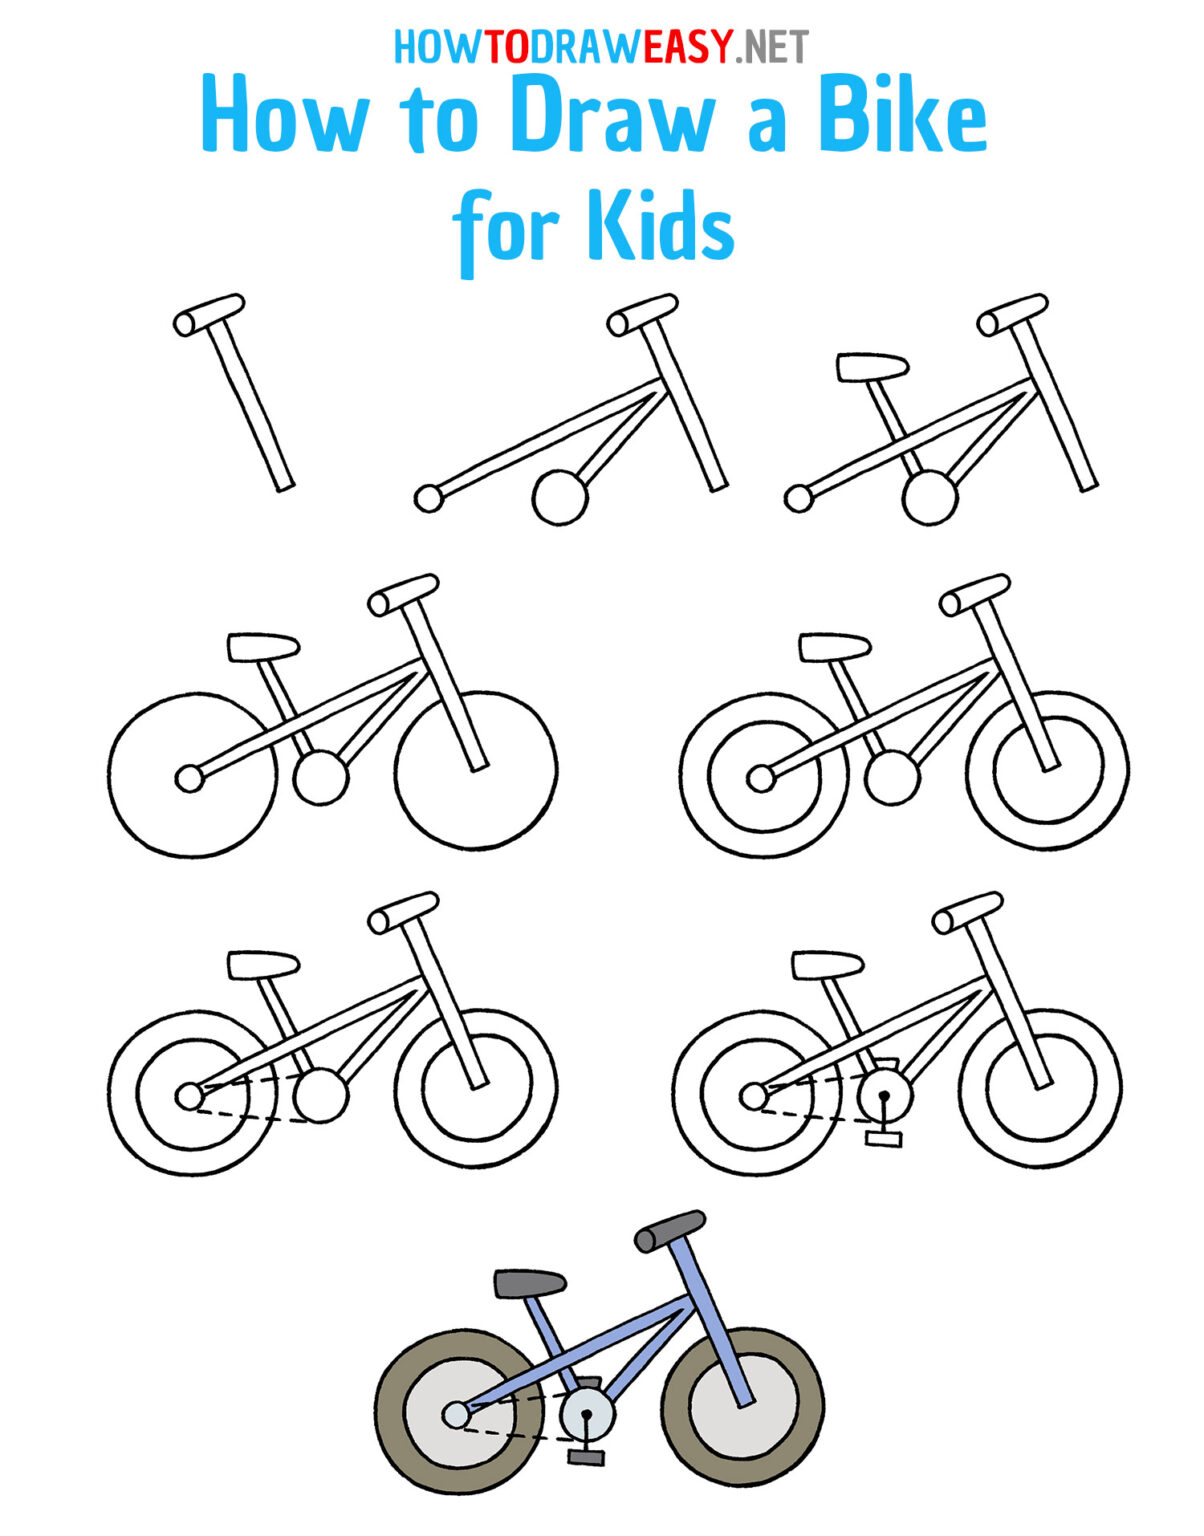 How to Draw a Bike for Kids How to Draw Easy